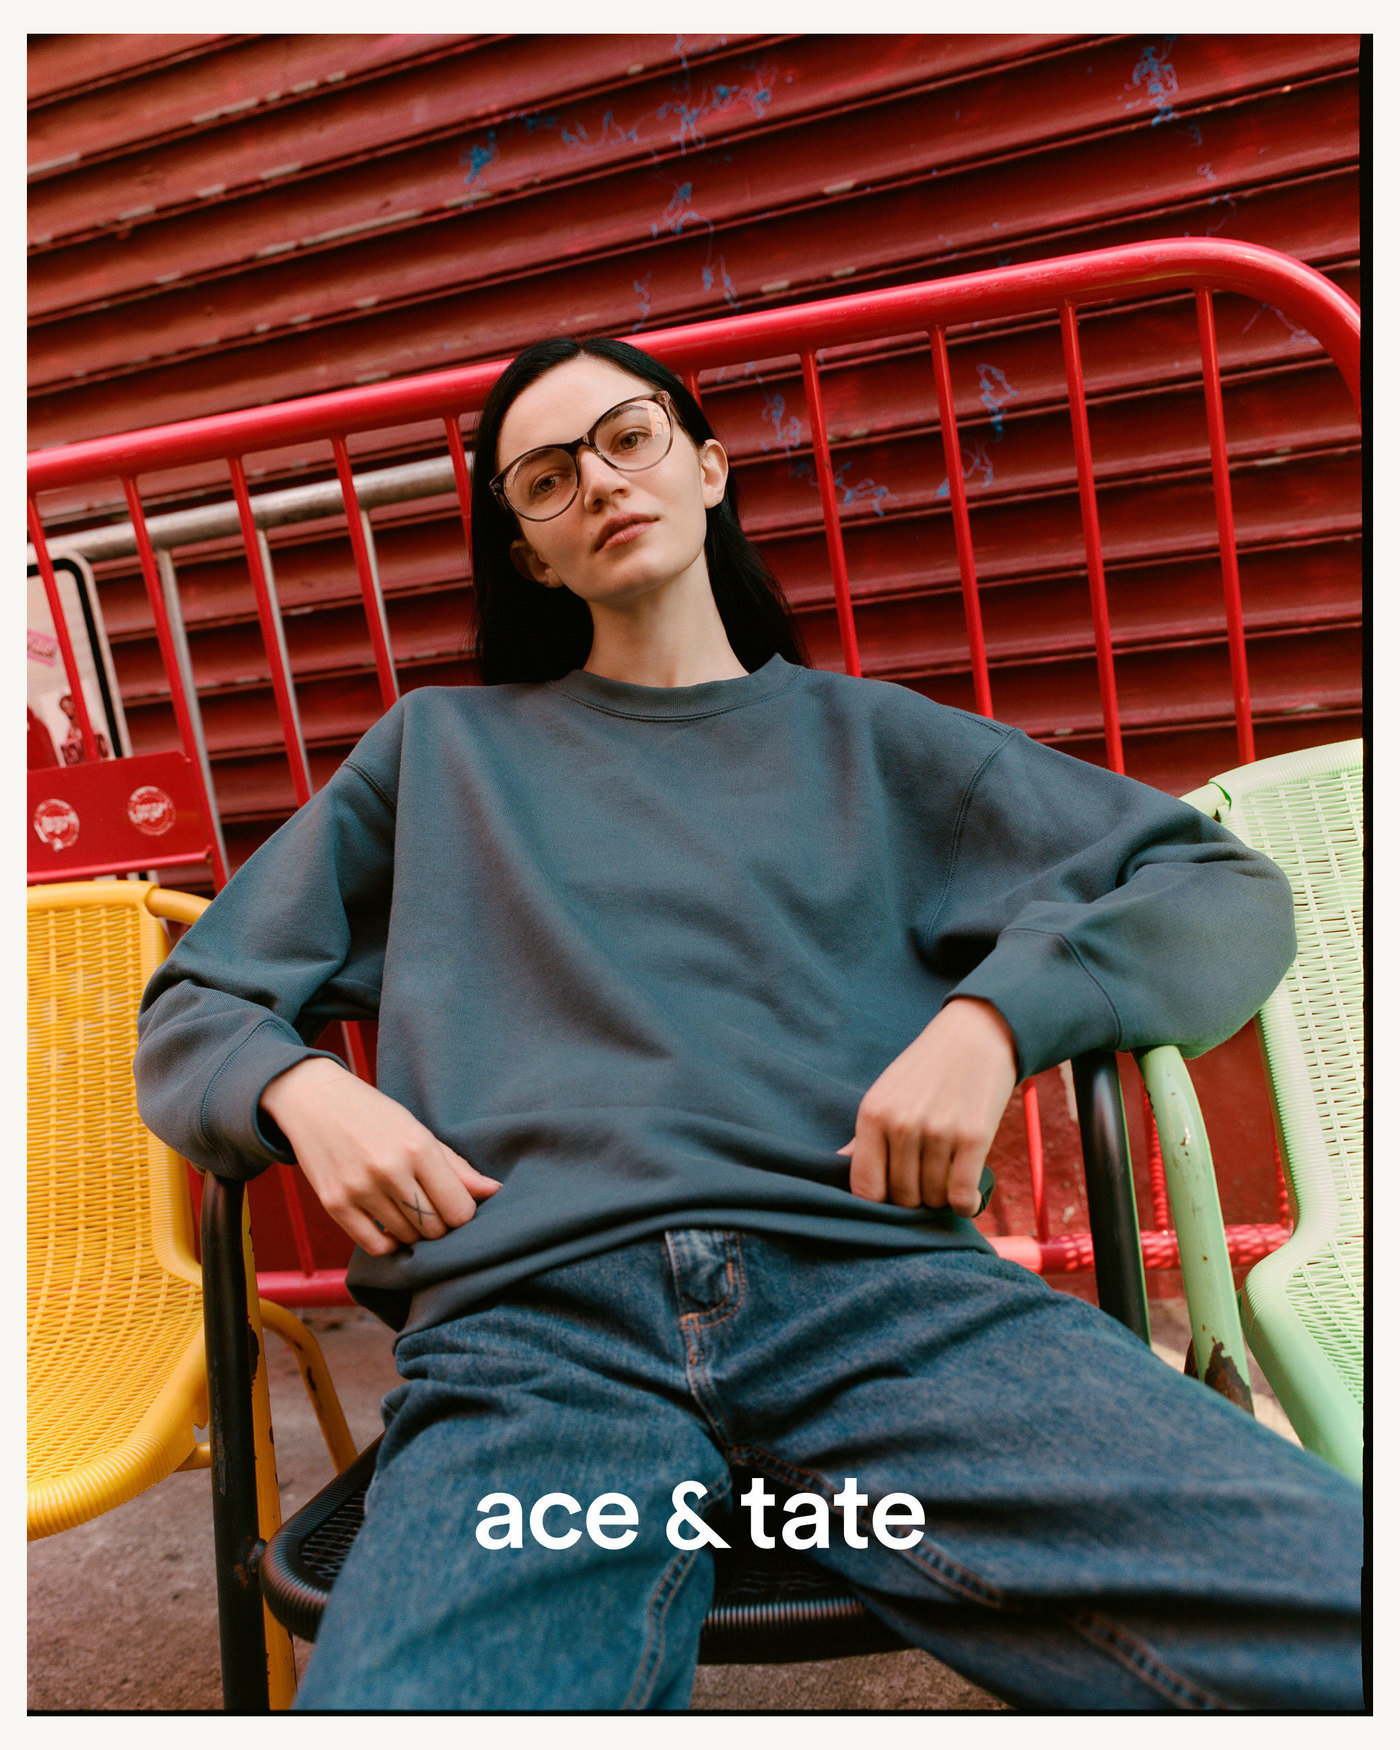 Ace and tate nyc 02 1400 xxx q85